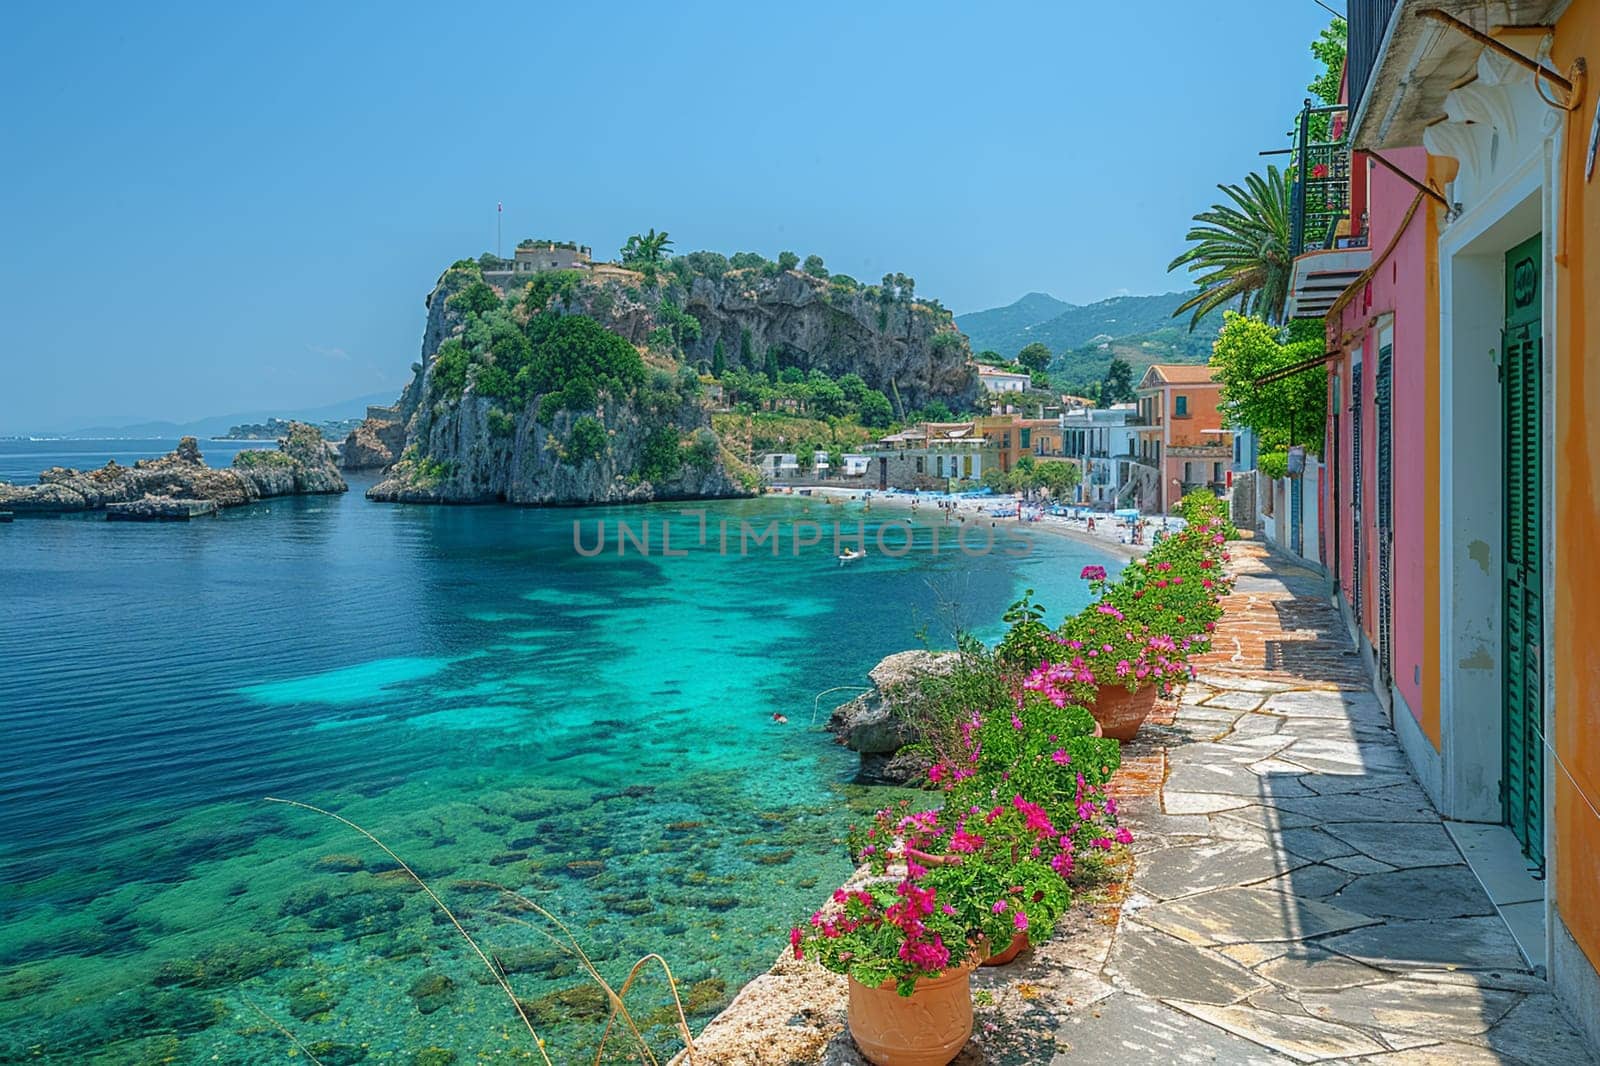 Waterfront in Casamicciola Terme on the island of ischia in italy by Ciorba